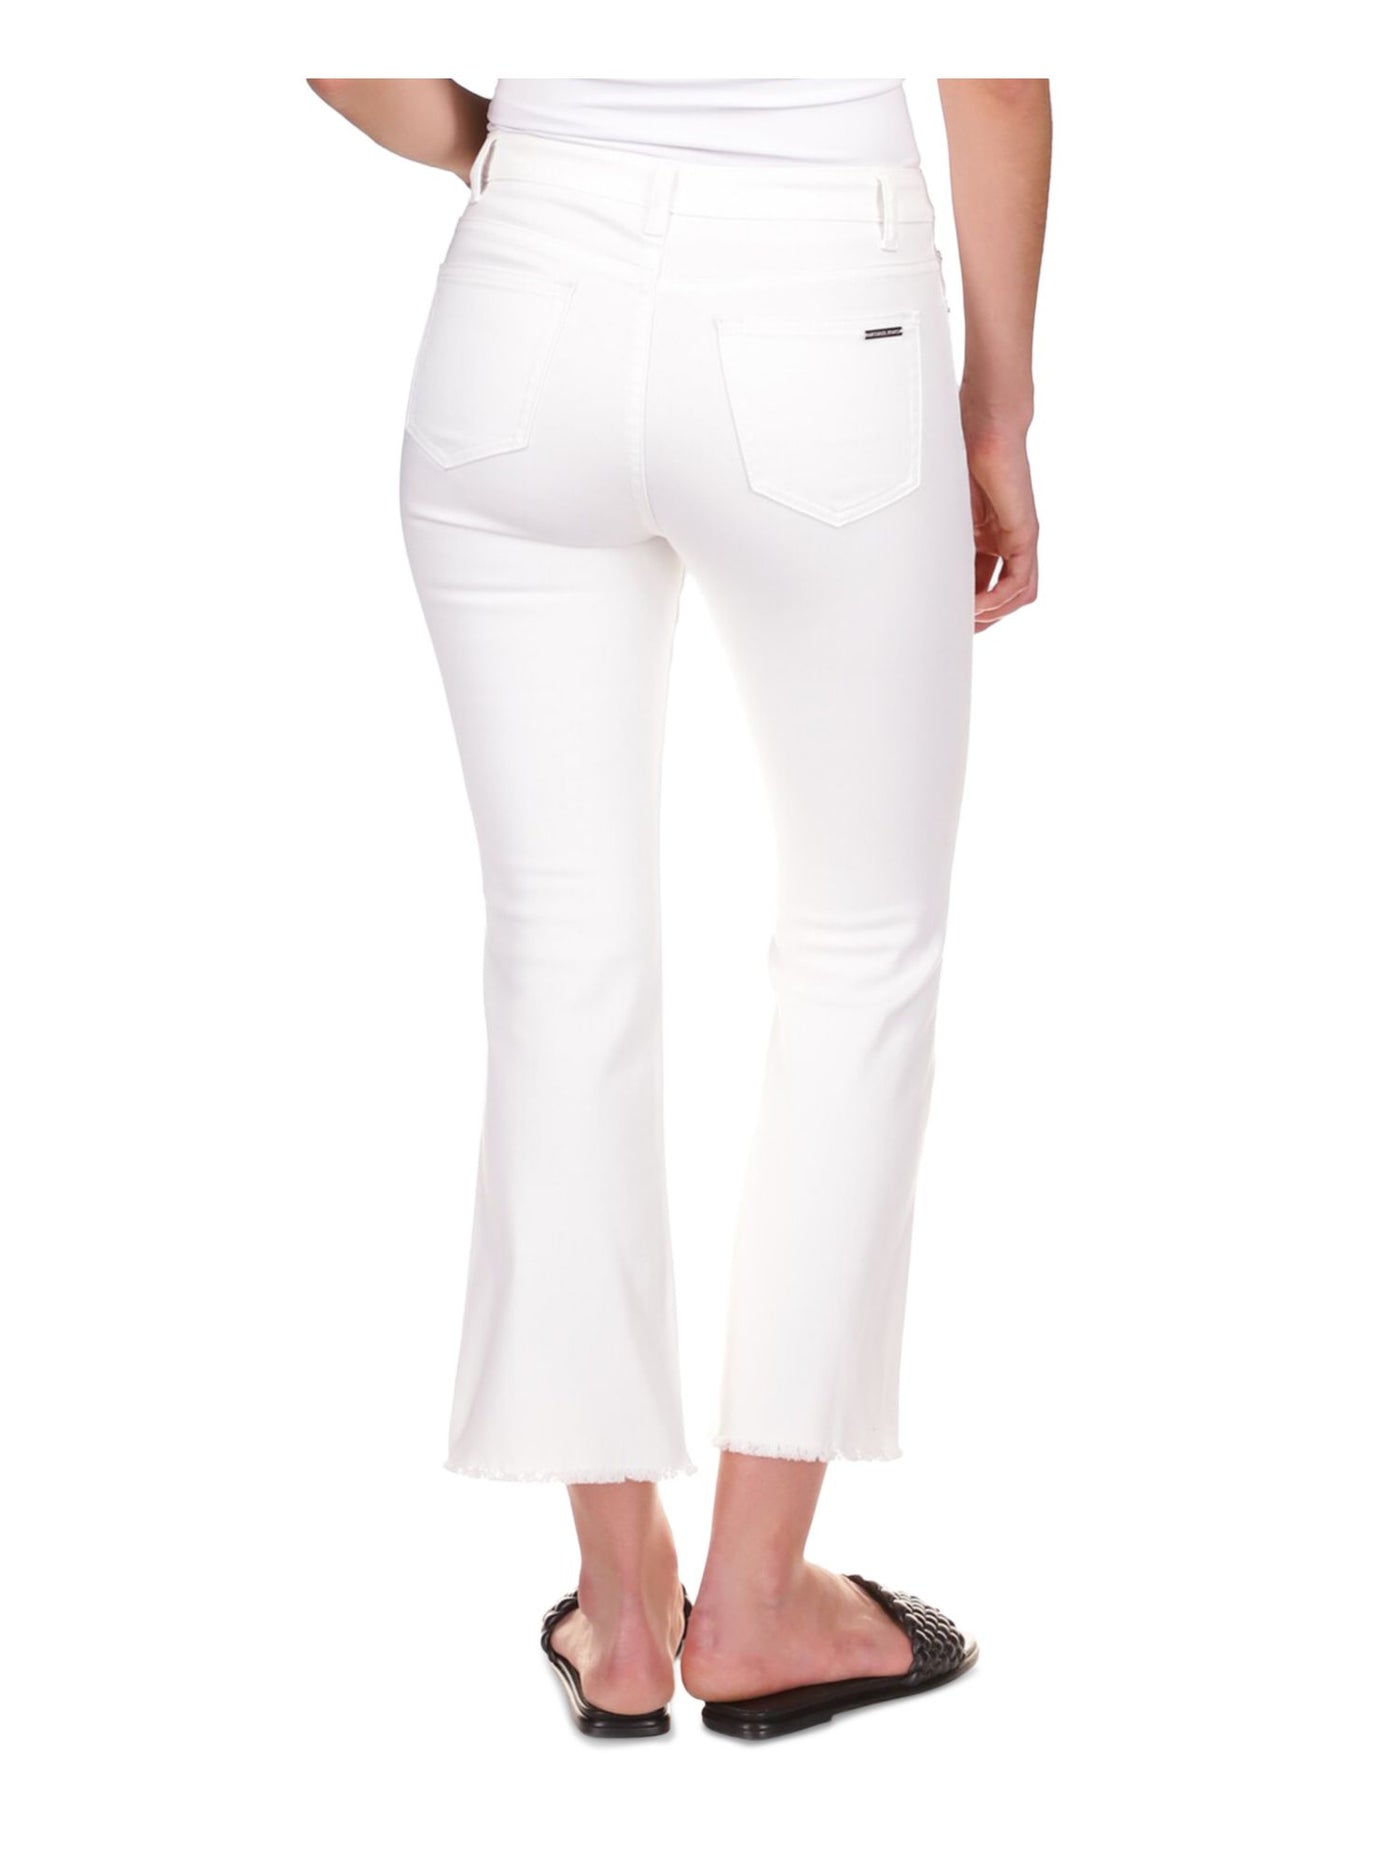 MICHAEL KORS Womens White Pocketed Frayed Button Fly Flared Cropped High Waist Jeans 16